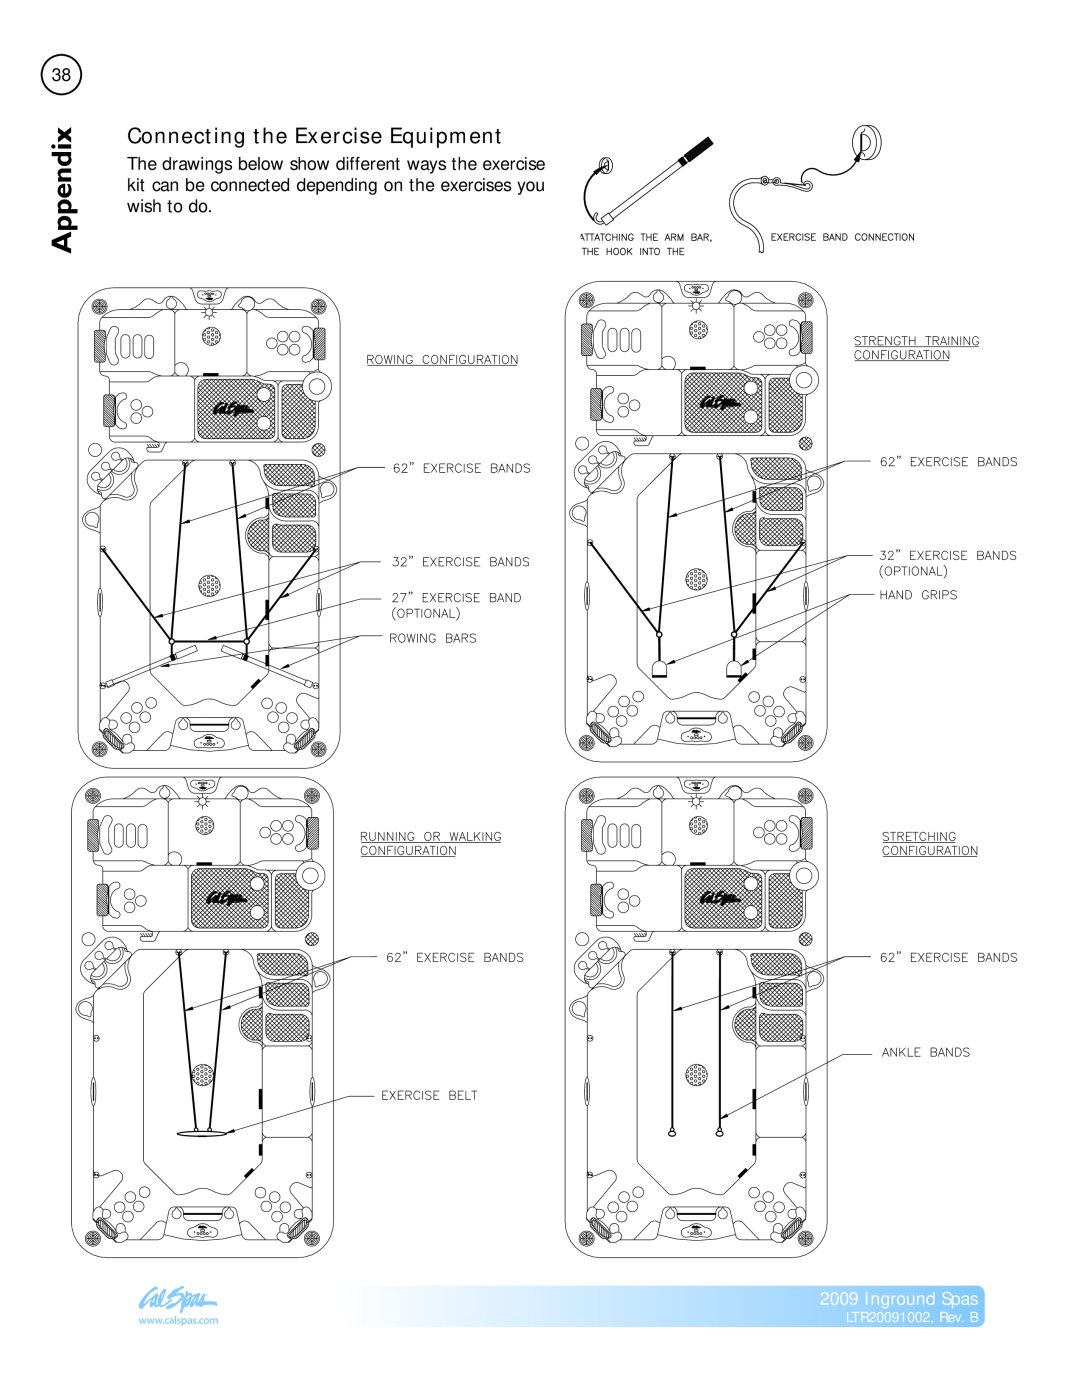 Cal Spas manual Connecting the Exercise Equipment, Inground Spas, LTR20091002, Rev. B, Appendix 